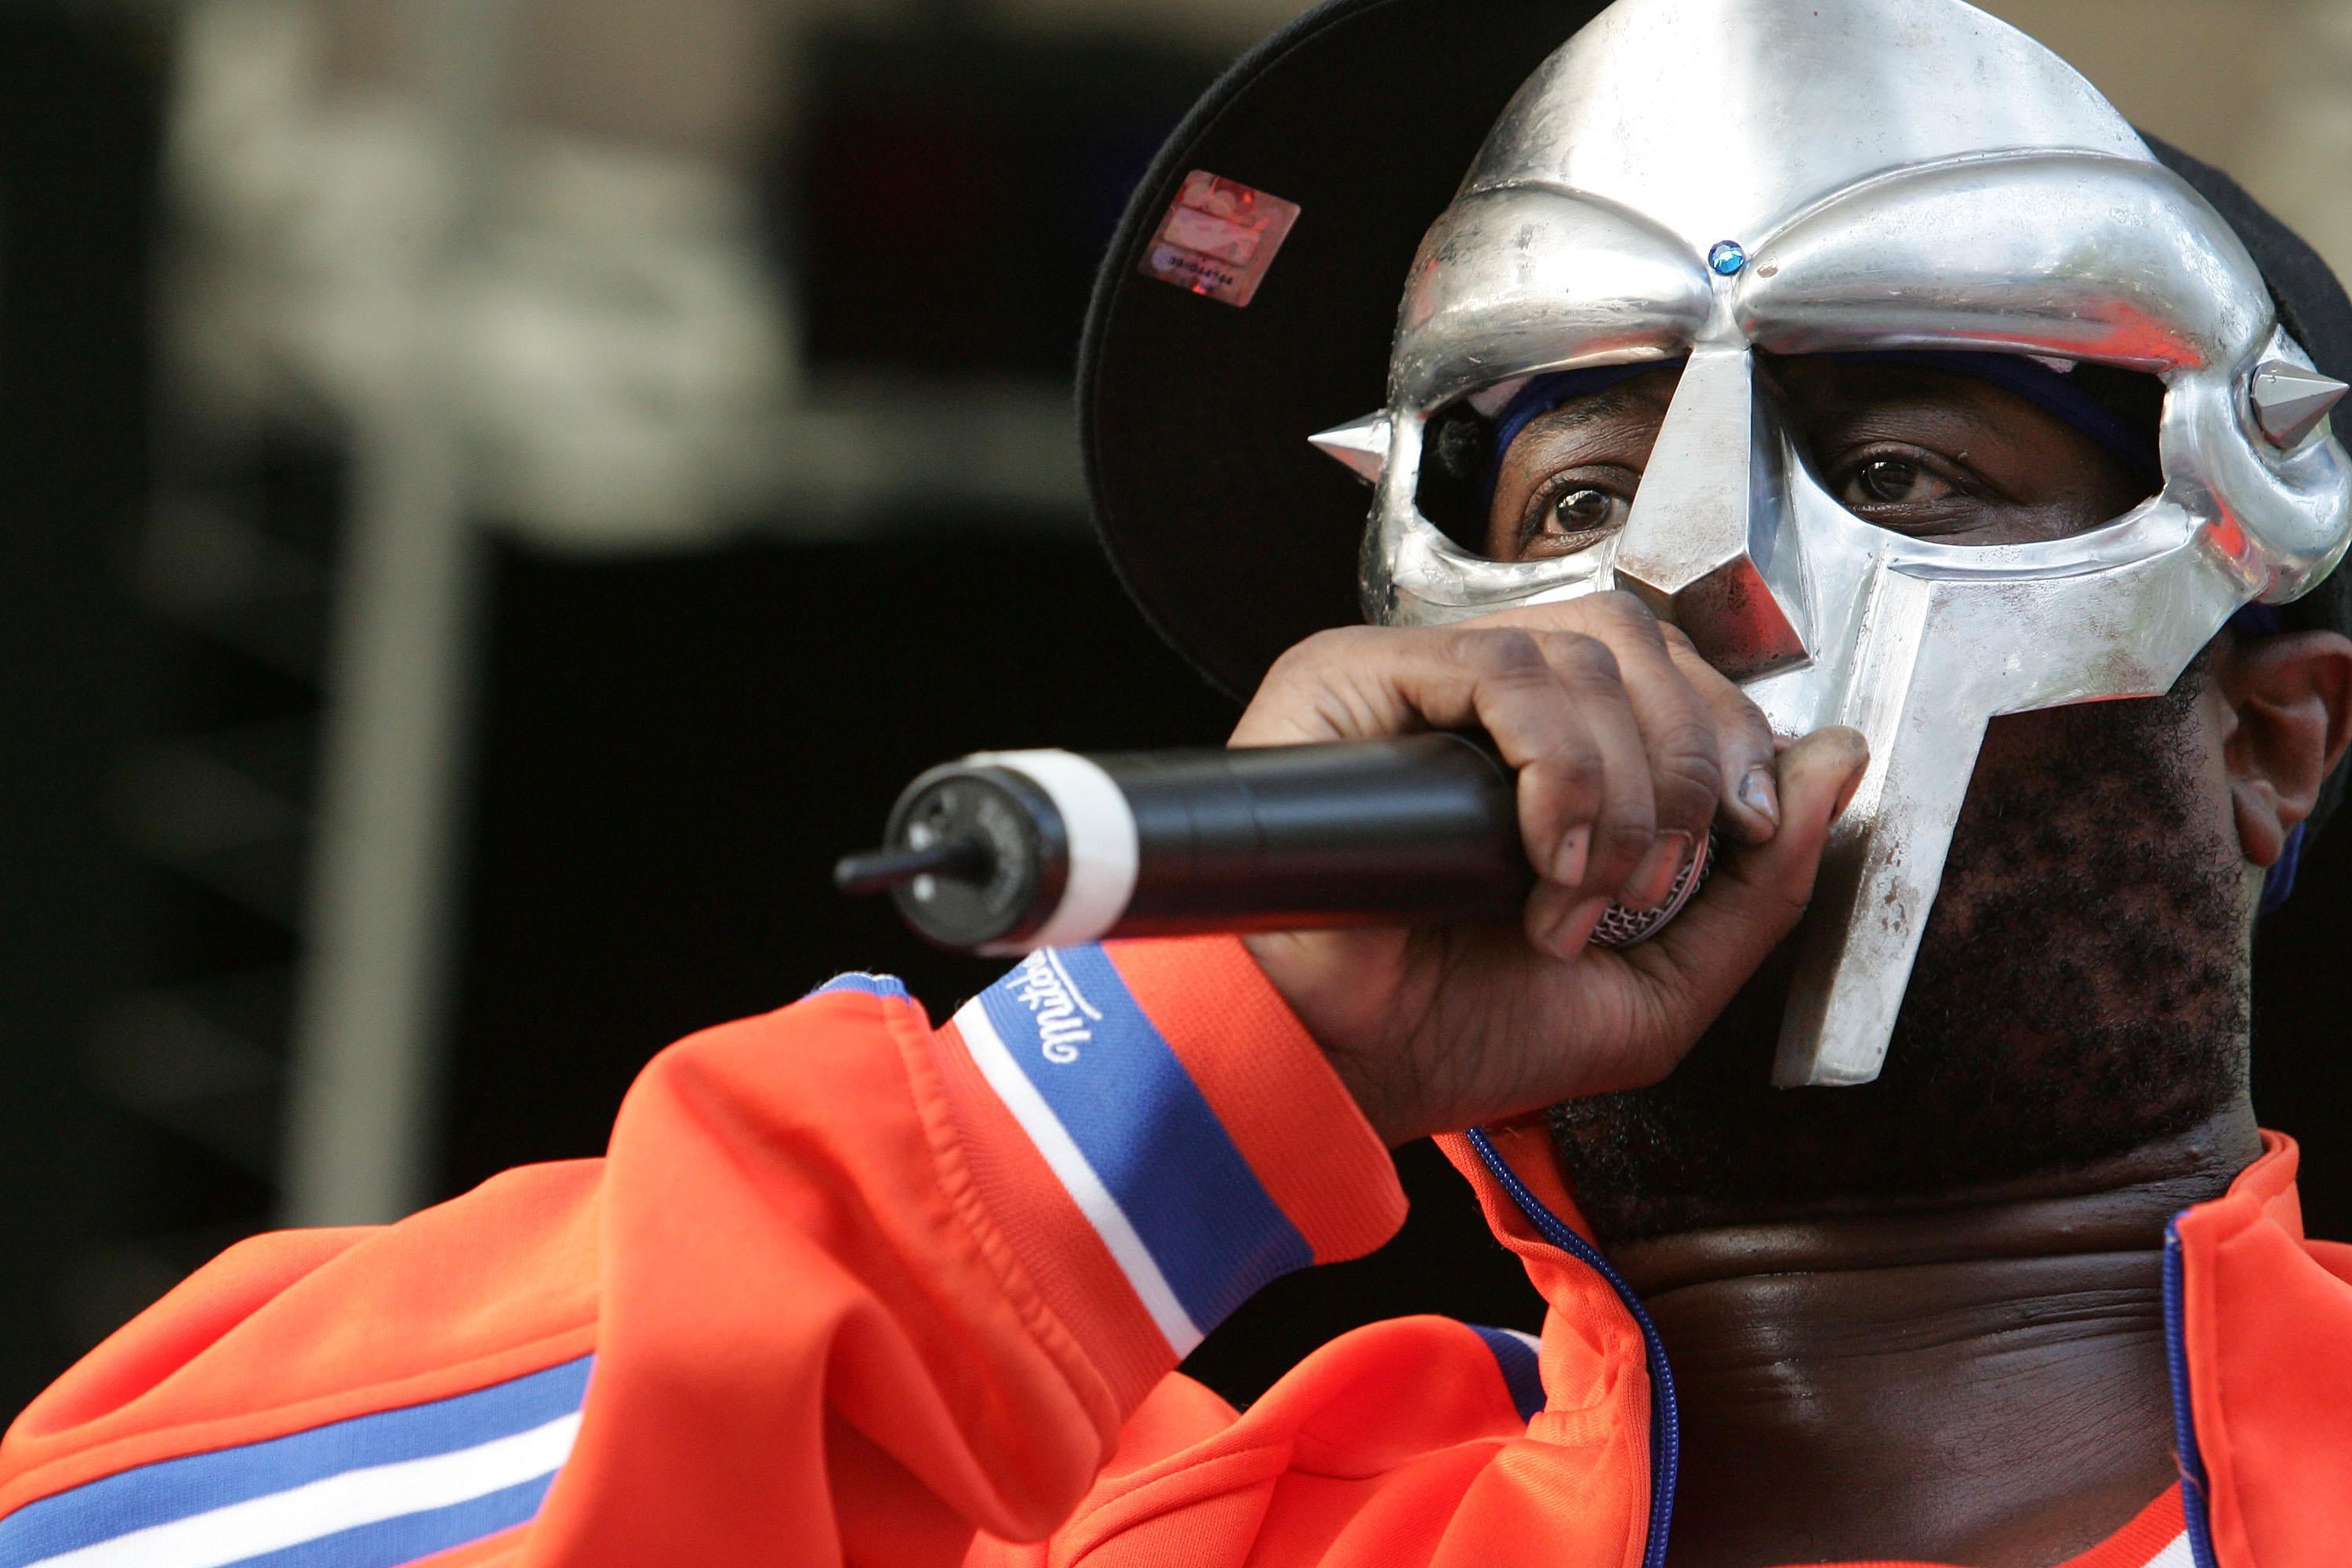 MF DOOM raises a mic and dons a Knicks Jersey, his face hidden behind his metal mask.